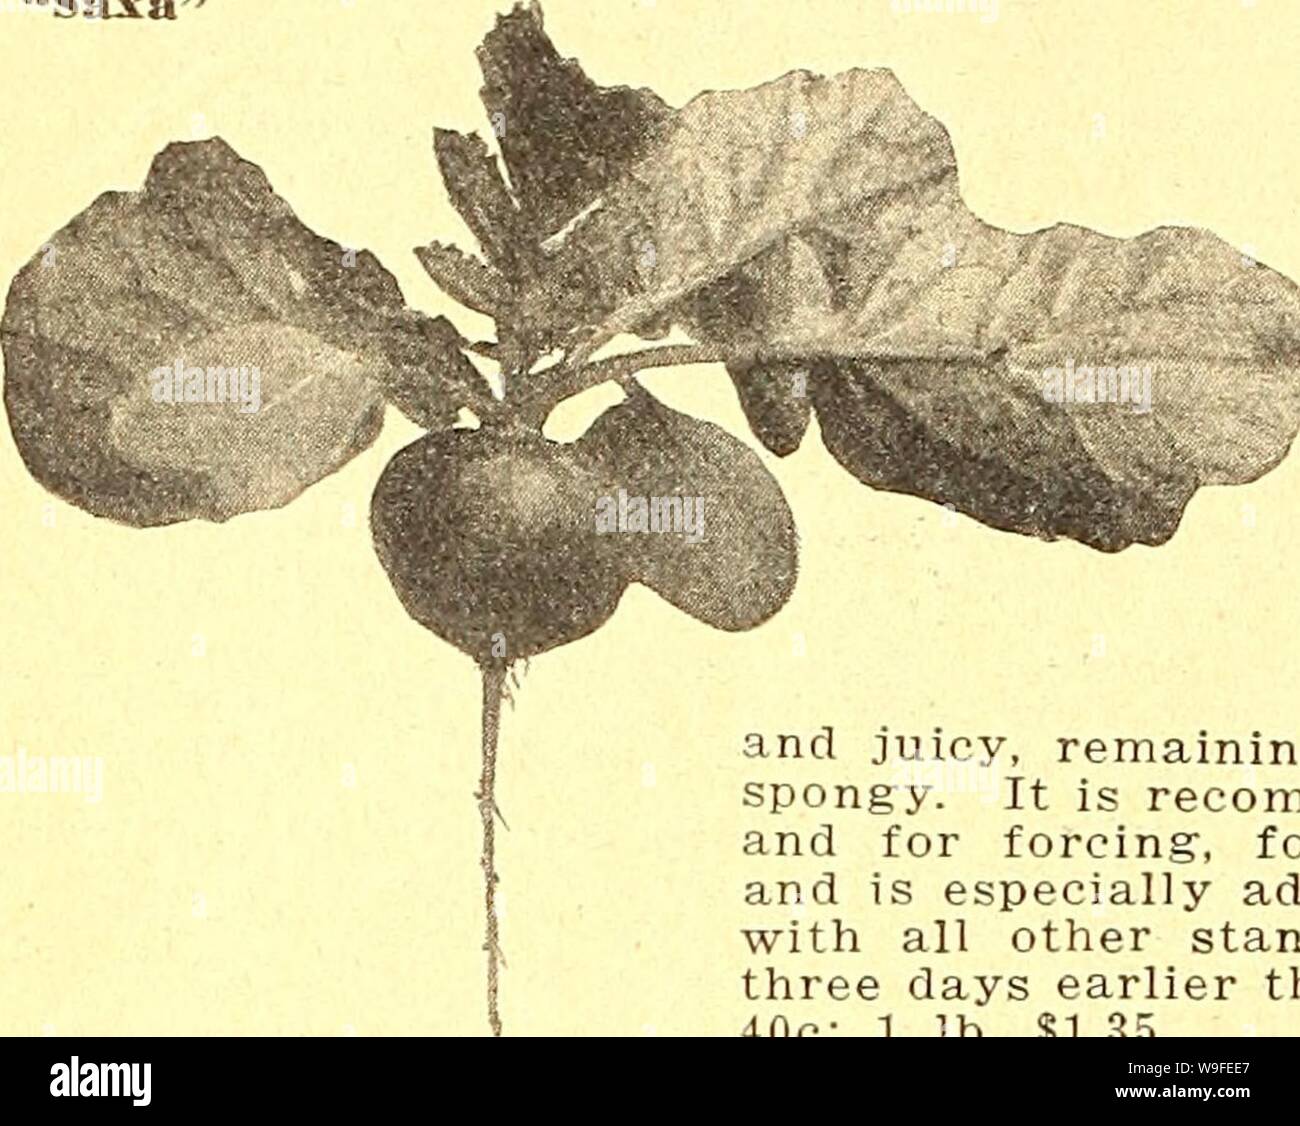 Archive image from page 35 of Currie's farm and garden annual. Currie's farm and garden annual : spring 1925 50th year  curriesfarmgarde19curr 8 Year: 1925 ( 30 CURRIE BROTHERS COMPANY, MILWAUKEE, WIS, 'Saxa'    RADISH Culture—Radishes do best in a light sandy soil. For a successive supply sow from the middle of March until September, at intervals of two or three weeks. Sow in a hotbed for an early supply. ,'One ox. to lOO feet of drill; 8 to 10 lbs. per acre in drills. 'SAXA'—A fiery scarlet, perfectly g-lobular in shape, the leaves small and the root the thinnest possible tail. In less than Stock Photo